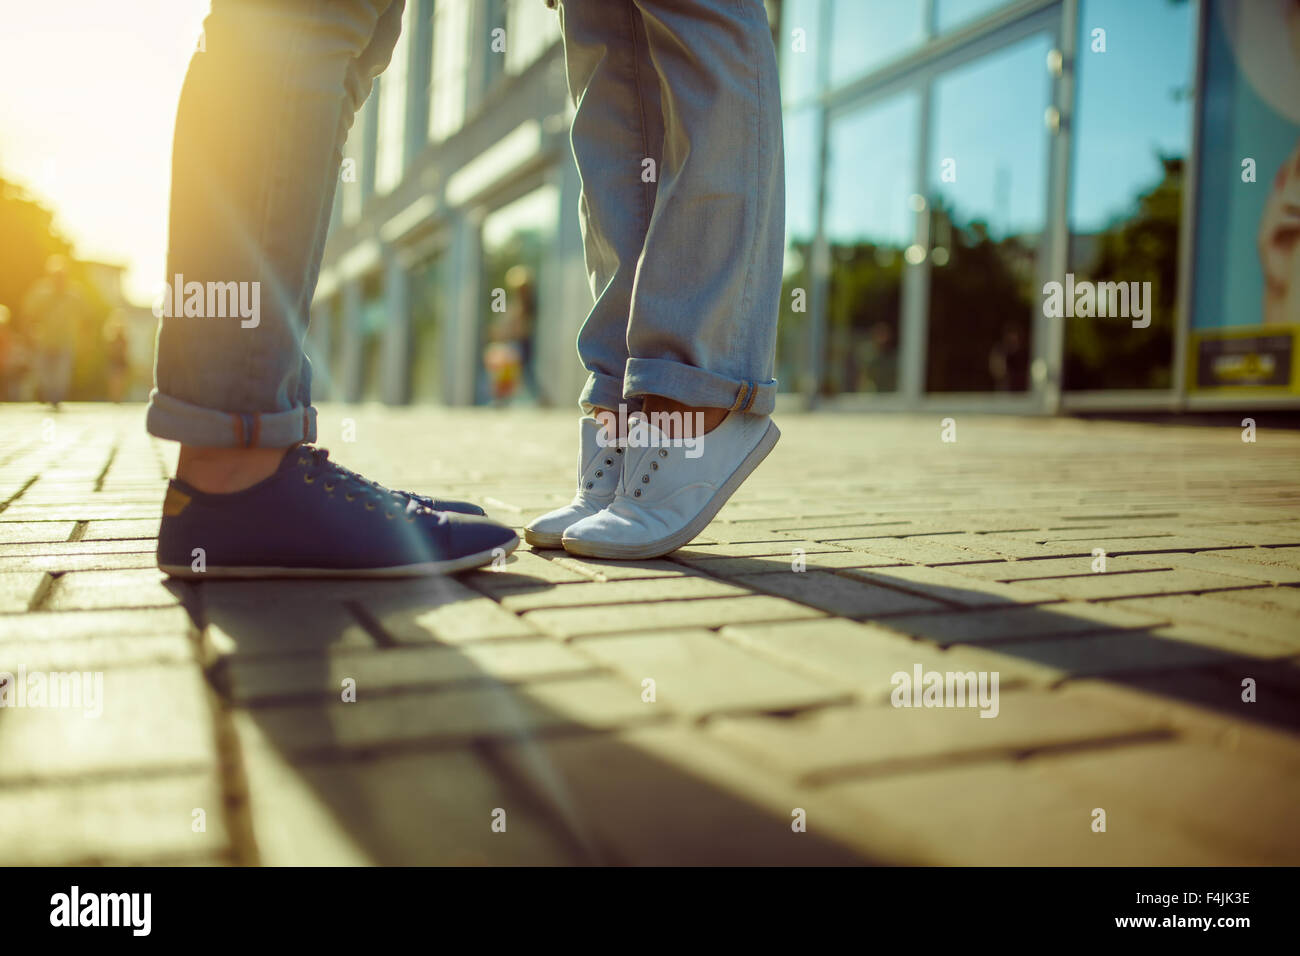 Kissing Feet And Man High Resolution Stock Photography and Images - Alamy